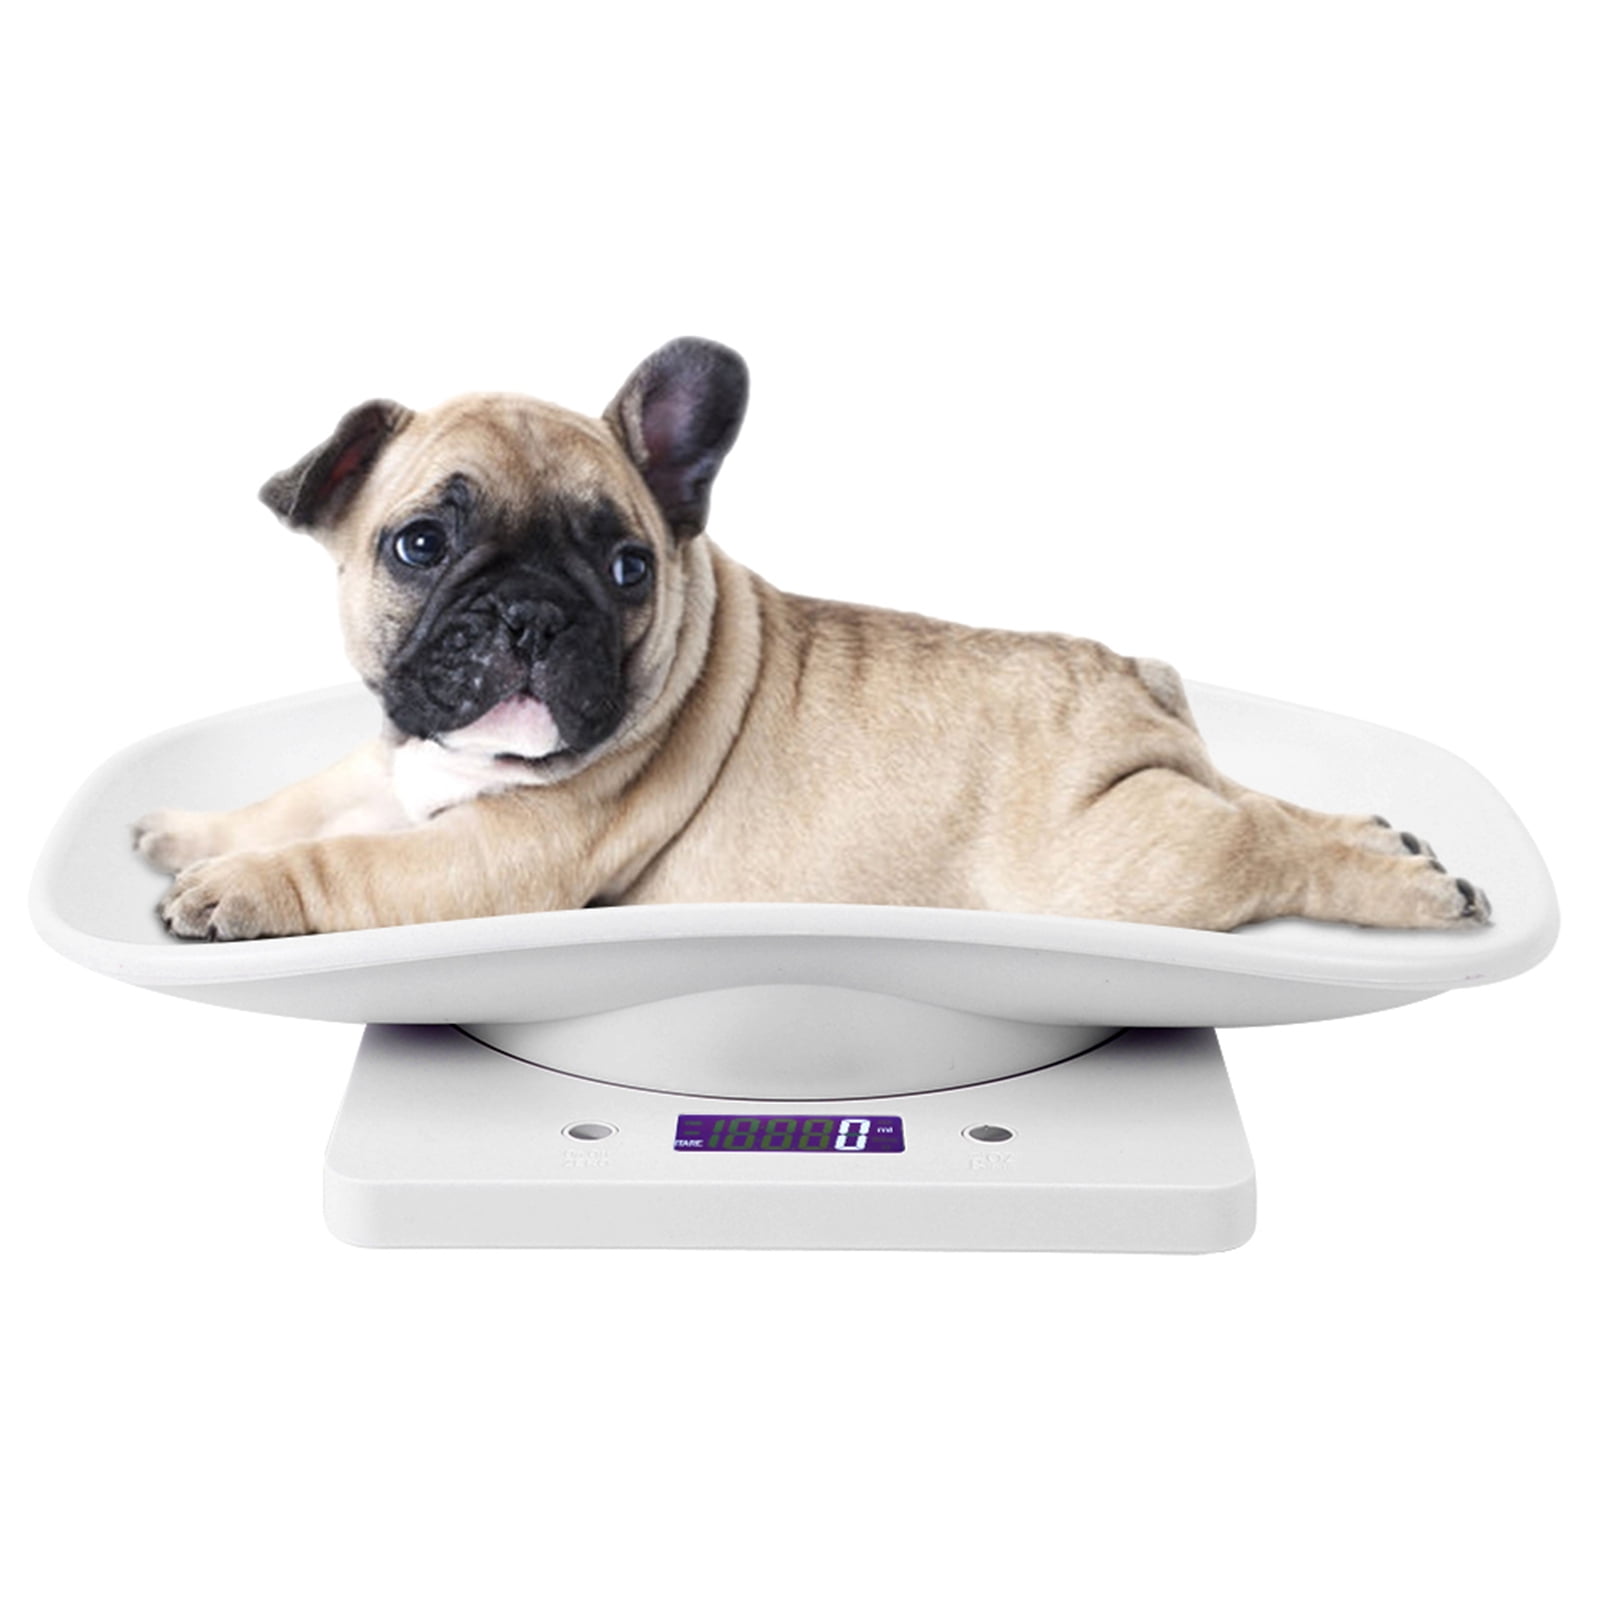 MINDPET-MED Digital Pet Scale for Small Animal Whelping ScaleMini Precision Gram Weight Balance Scale High Precision 1G Suitable for Newborn Pets, Whi